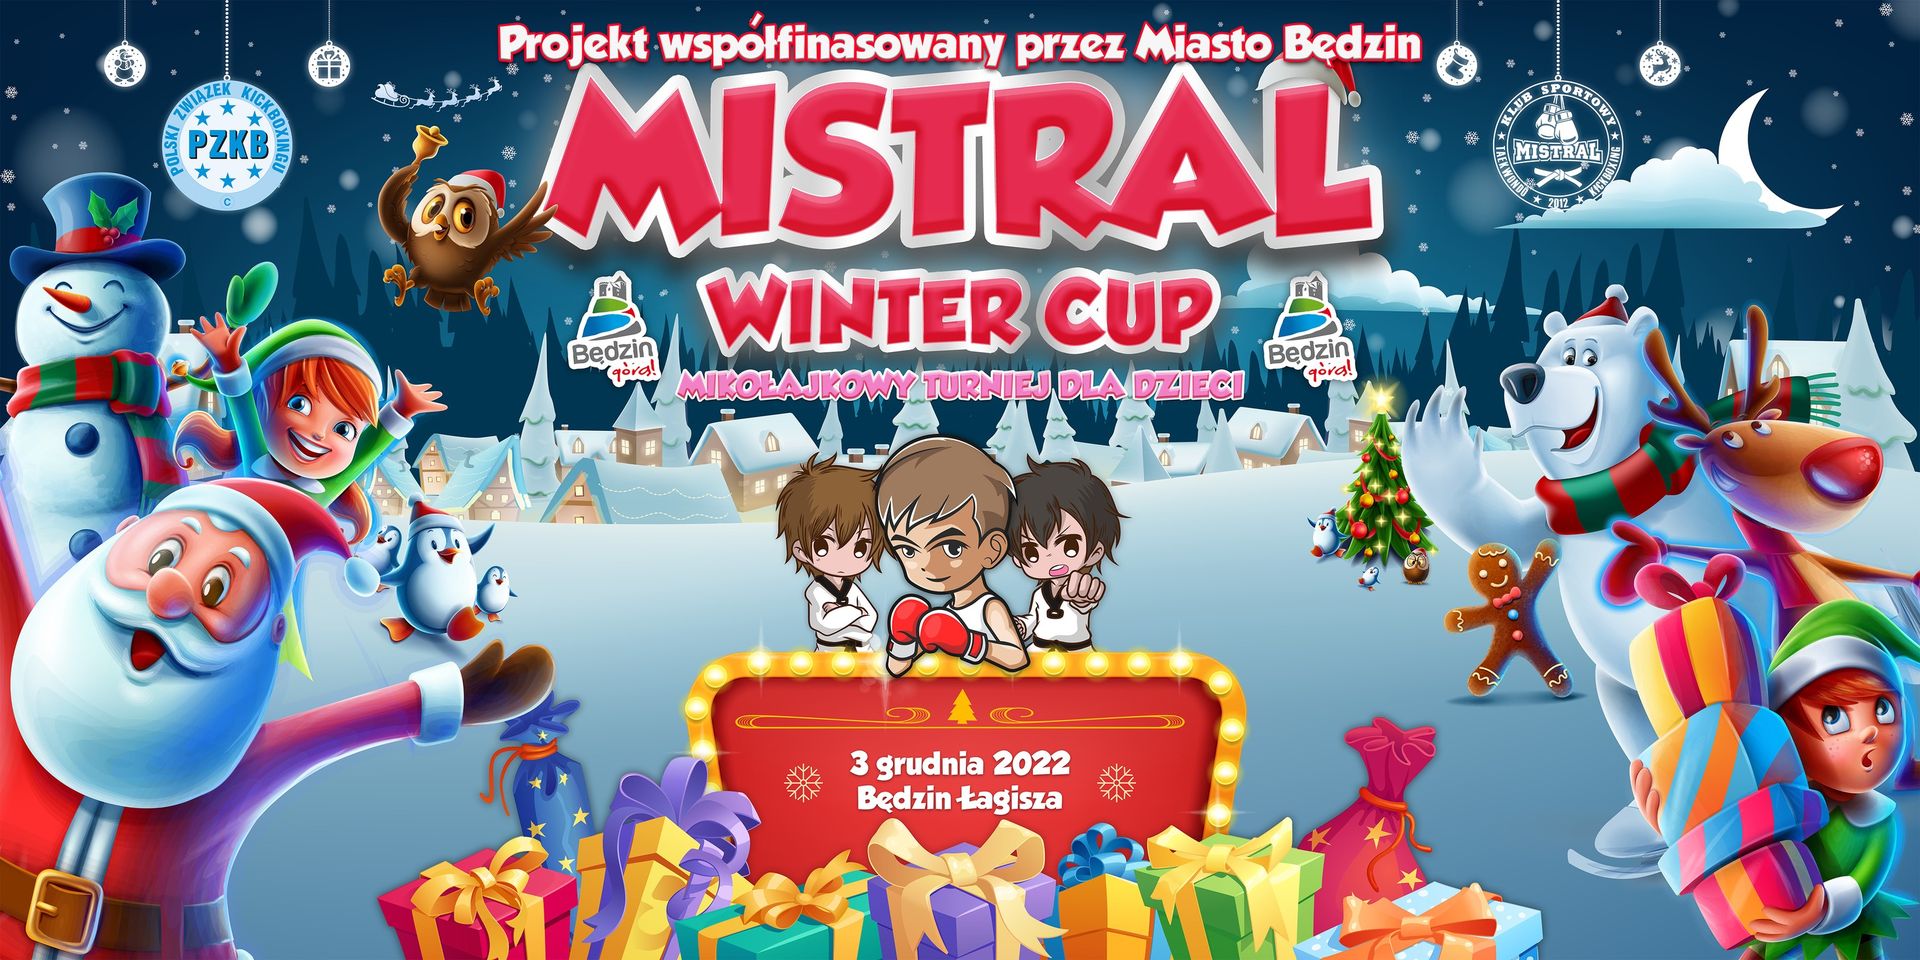 You are currently viewing KOMUNIKAT: Mistral Winter Cup 03.12.2022